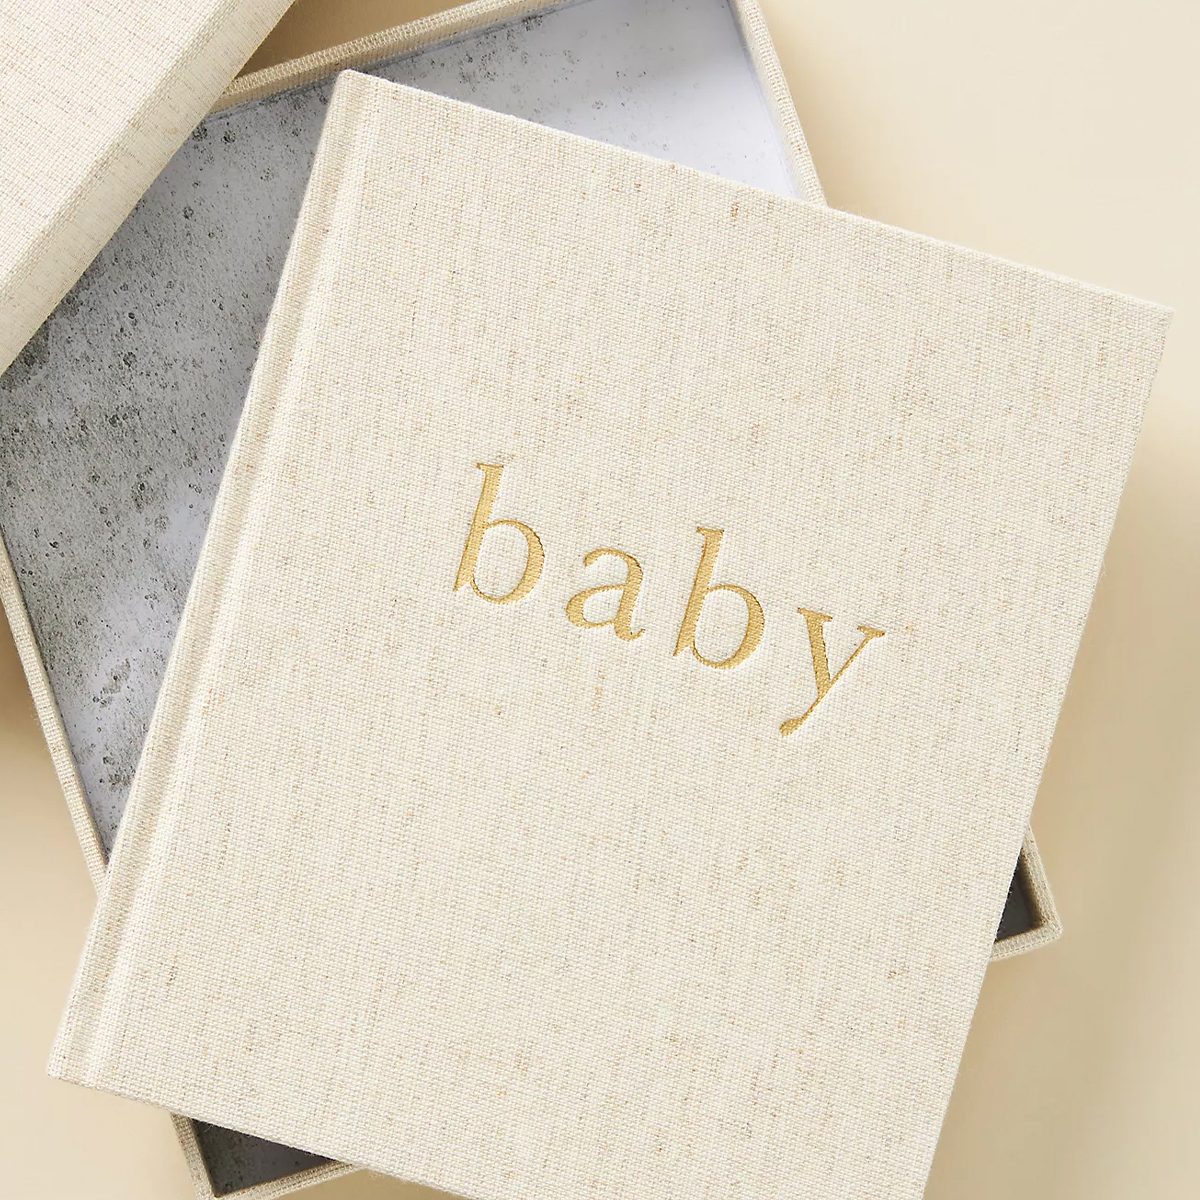 <p>New parents will want to record everything from the baby's first kick to their first haircut. This sophisticated, <a href="https://www.anthropologie.com/shop/baby-book2" rel="noopener noreferrer">linen-bound baby book</a> features 96 pages of guided prompts, spaces for handprints and footprints, photos, and notes. It comes ready to wrap in a beautiful keepsake box that will keep all of those memories safe for years to come. This is one of those <a href="https://www.rd.com/list/holiday-gifts-that-give-back/">gifts that give back</a> tenfold with precious memories.</p> <p class="listicle-page__cta-button-shop"><a class="shop-btn" href="https://www.anthropologie.com/shop/baby-book2">Shop Now</a></p>